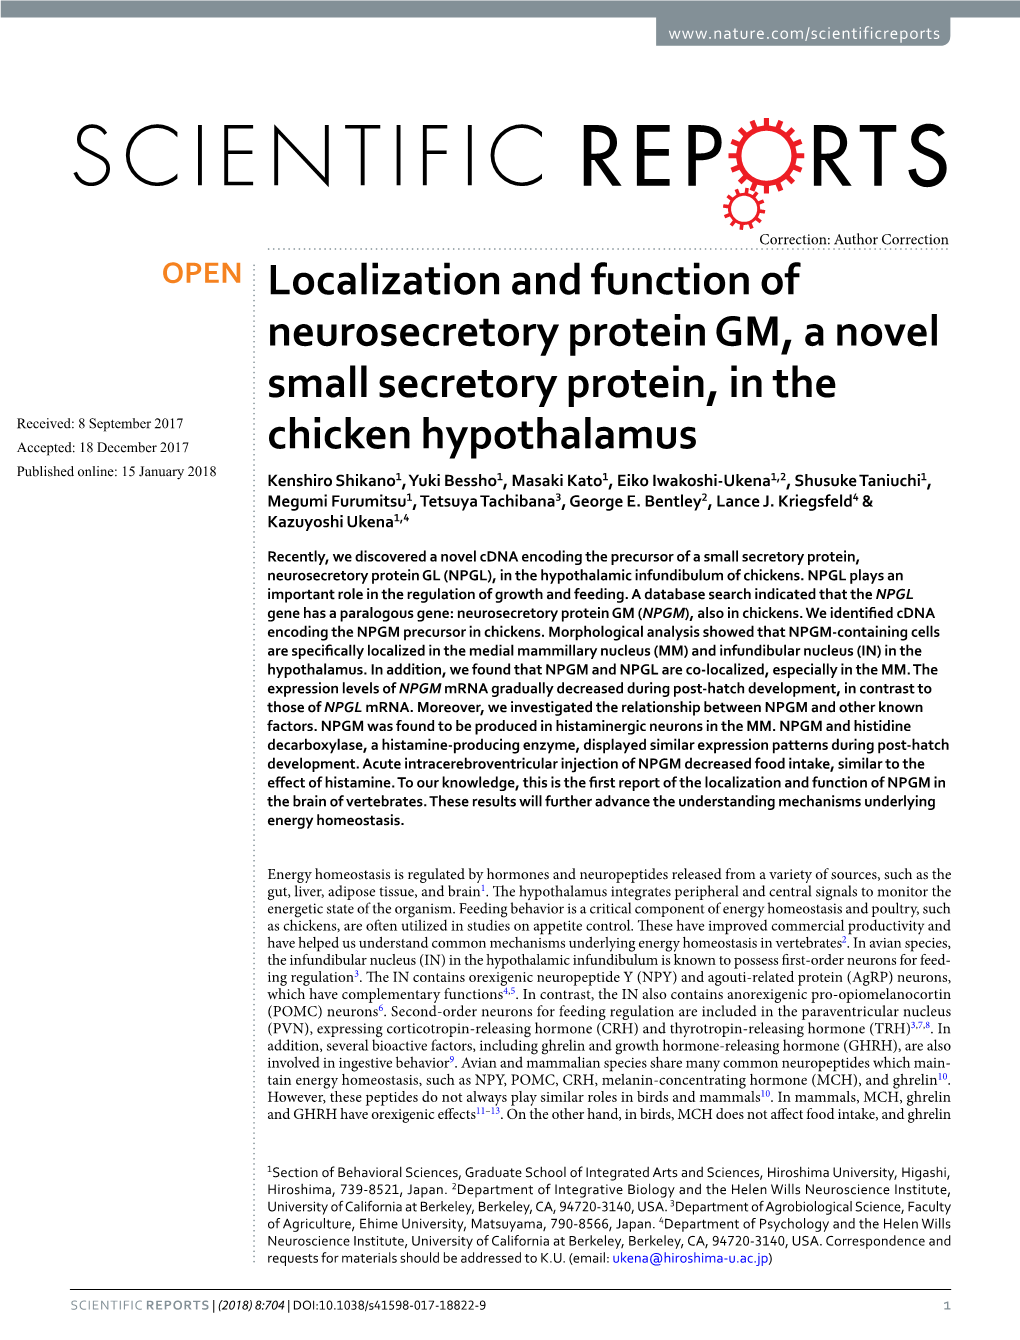 Localization and Function of Neurosecretory Protein GM, a Novel